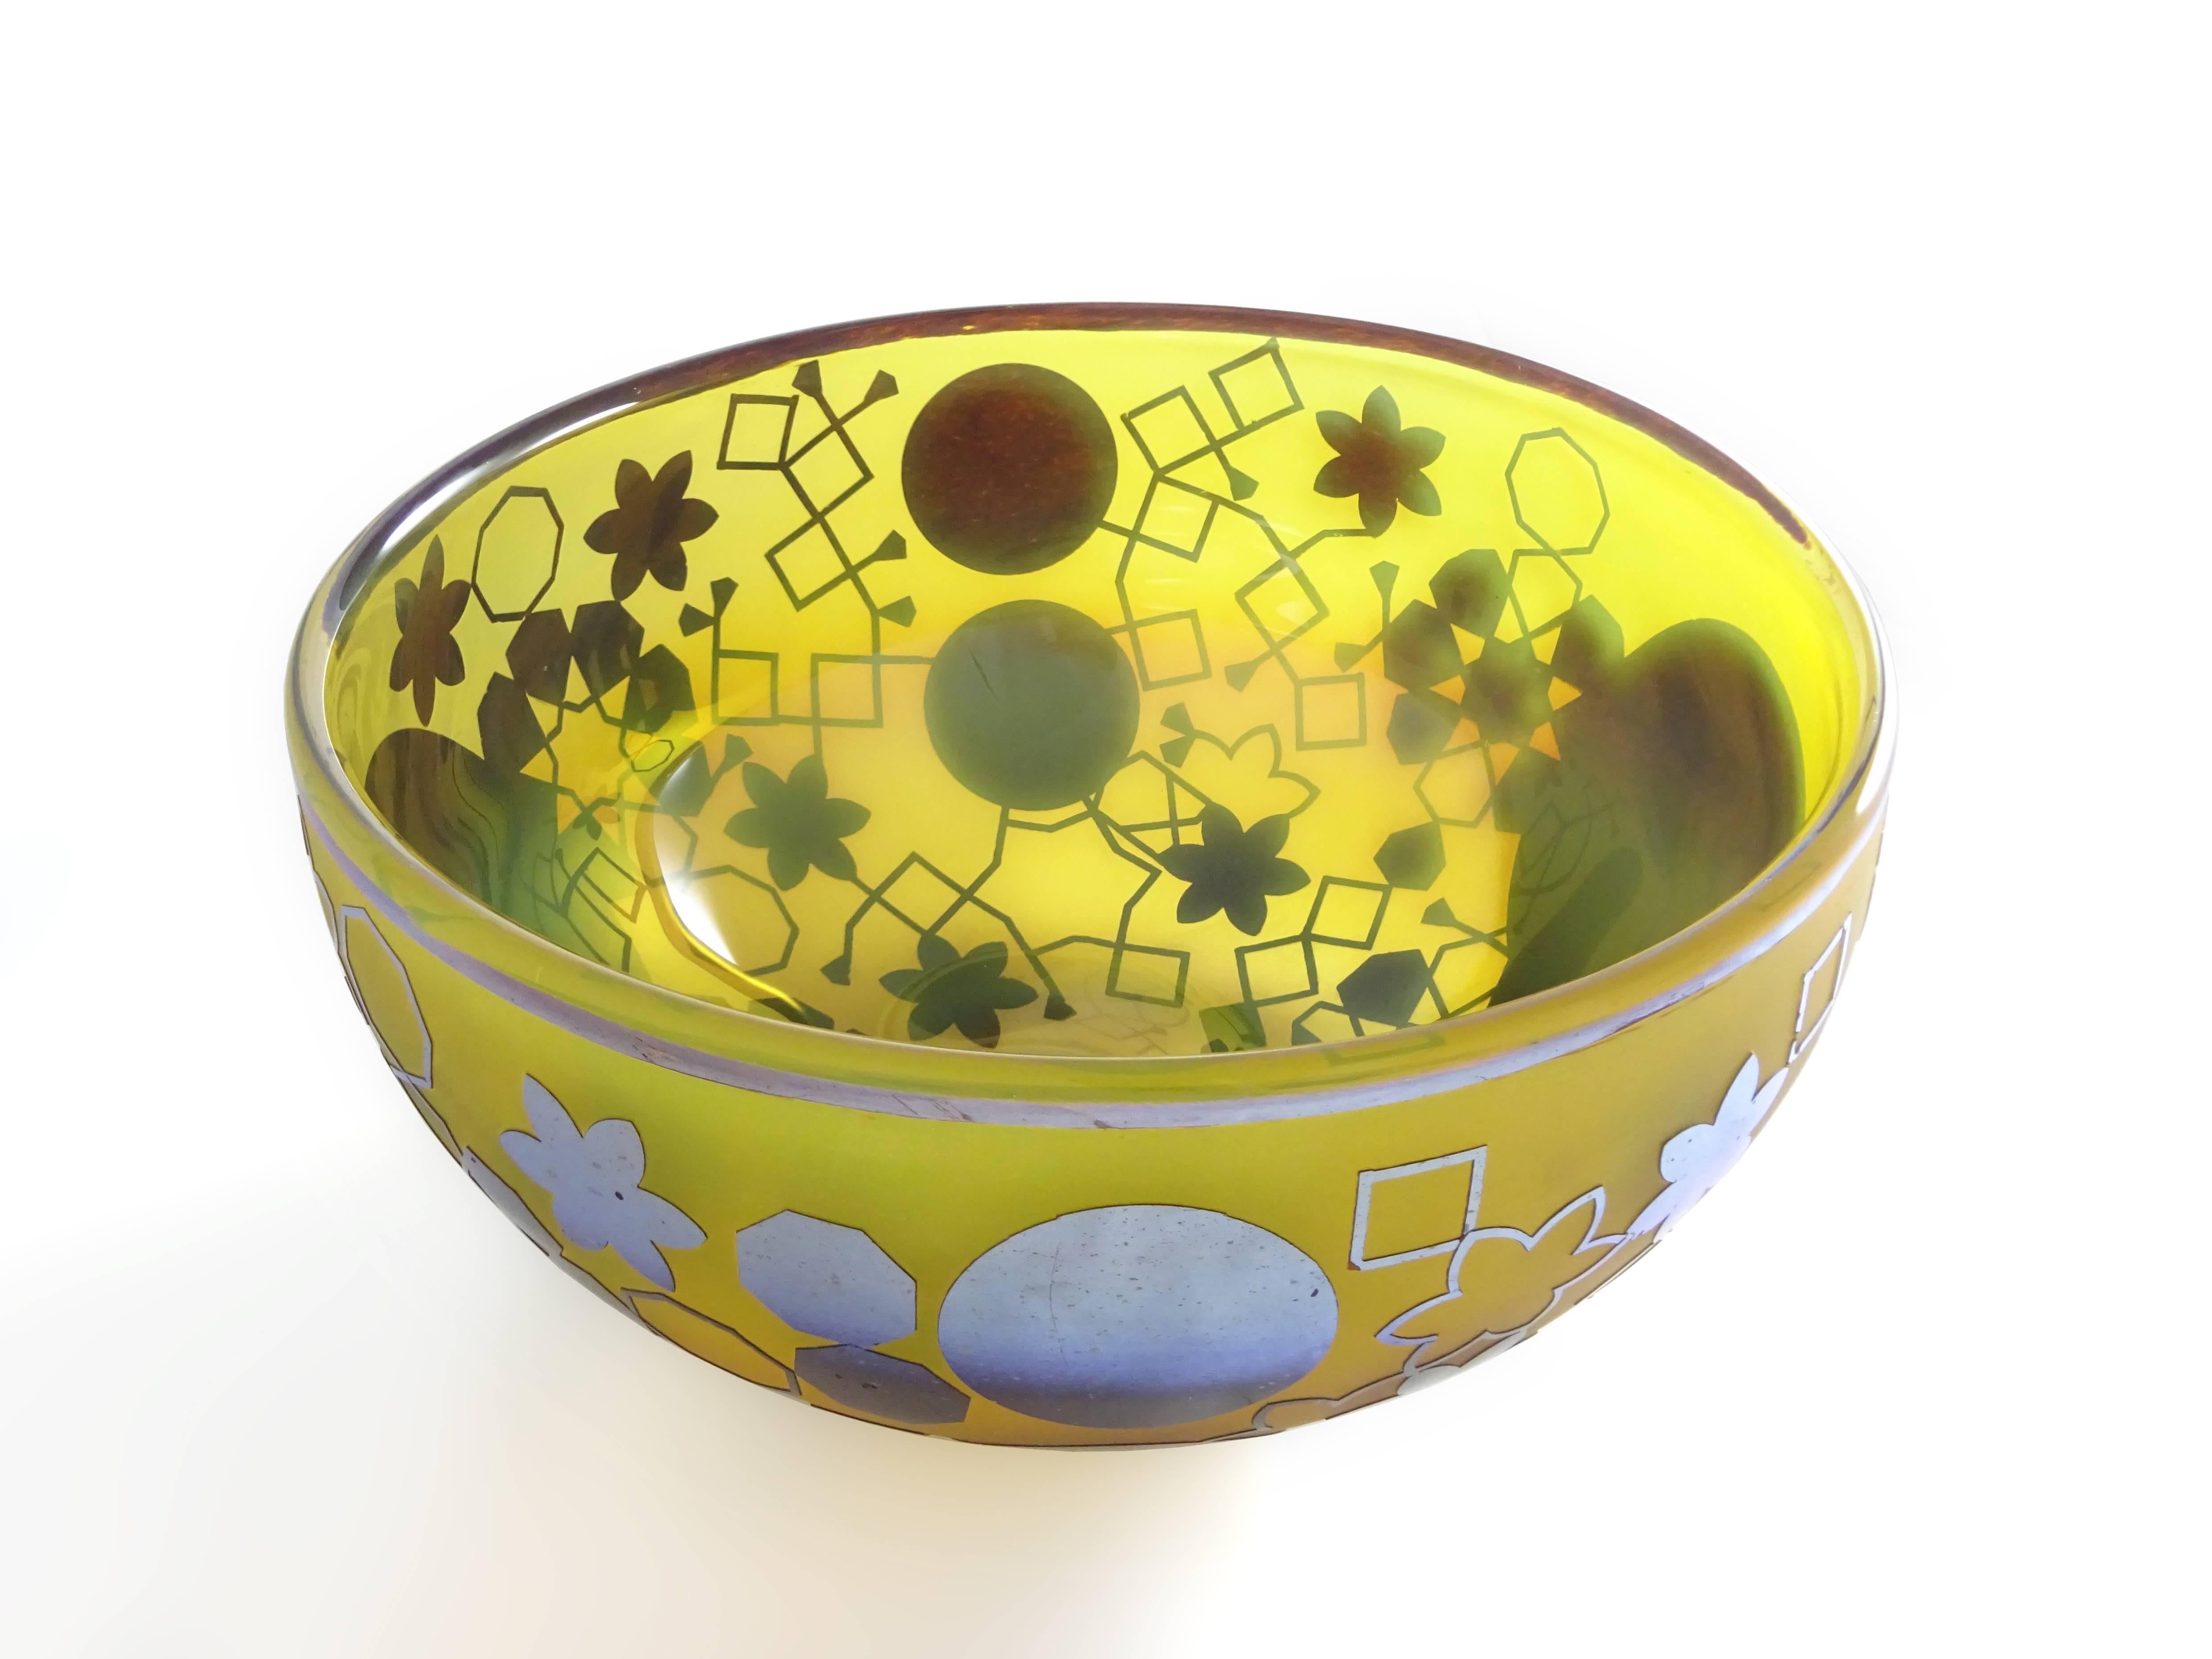 Blown glass bowl or vessel shaped sculpture. Yellow semi translucent glass with shiny glass decorations on the outside. This beautiful glass bowl exists of two blown glass layers. The first layer is made of yellow glass which becomes more of a ochre